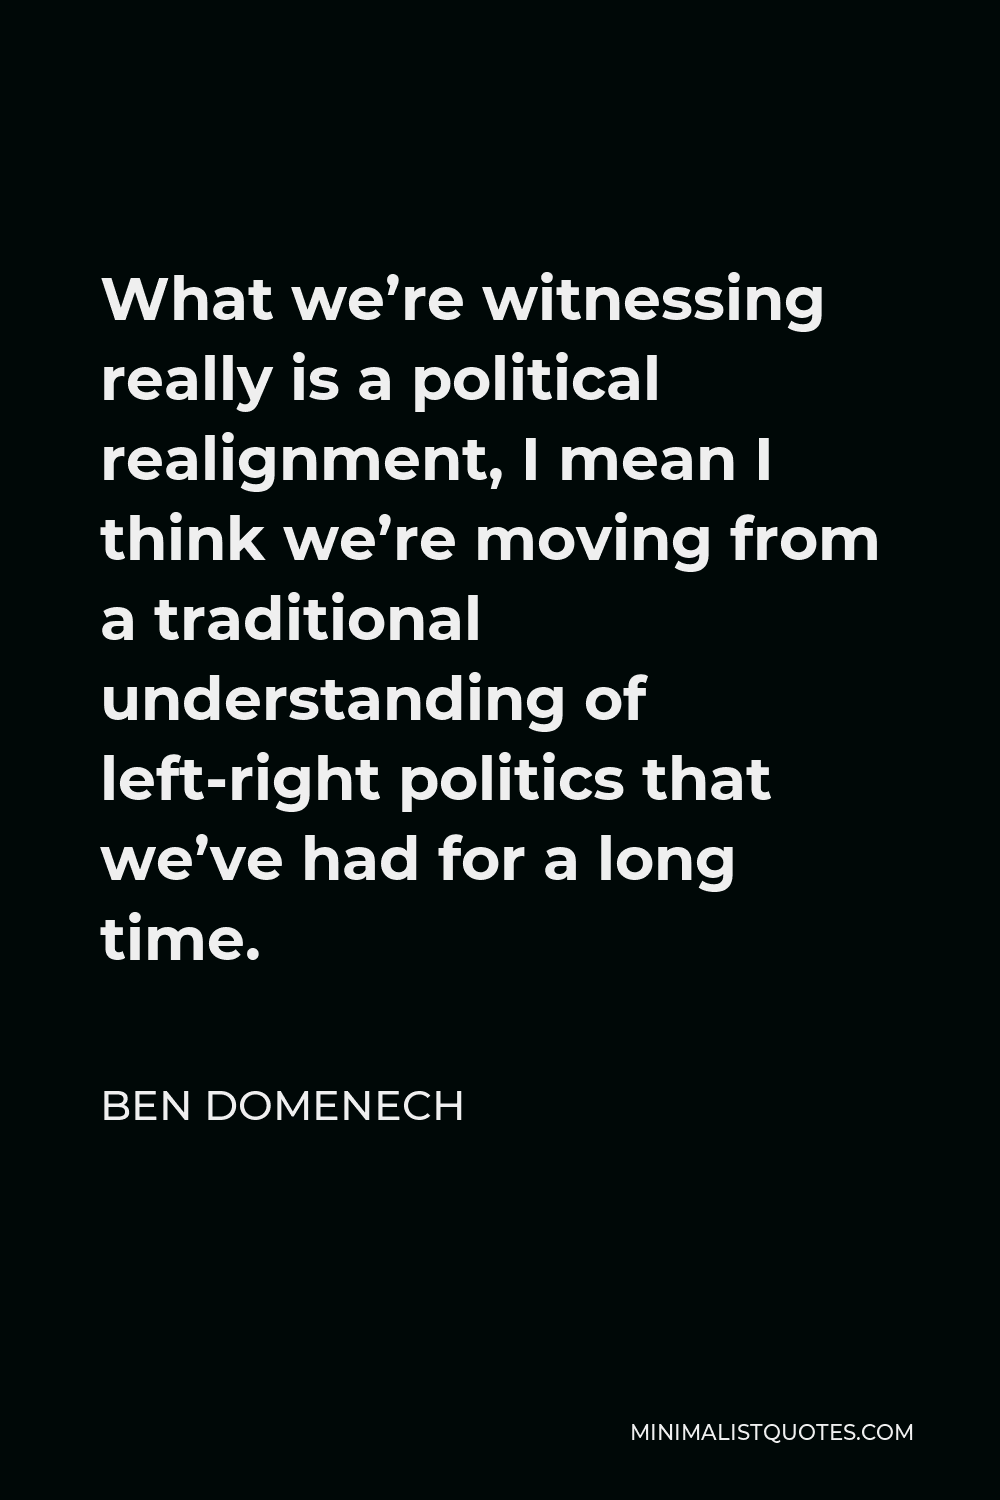 Ben Domenech Quote - What we’re witnessing really is a political realignment, I mean I think we’re moving from a traditional understanding of left-right politics that we’ve had for a long time.